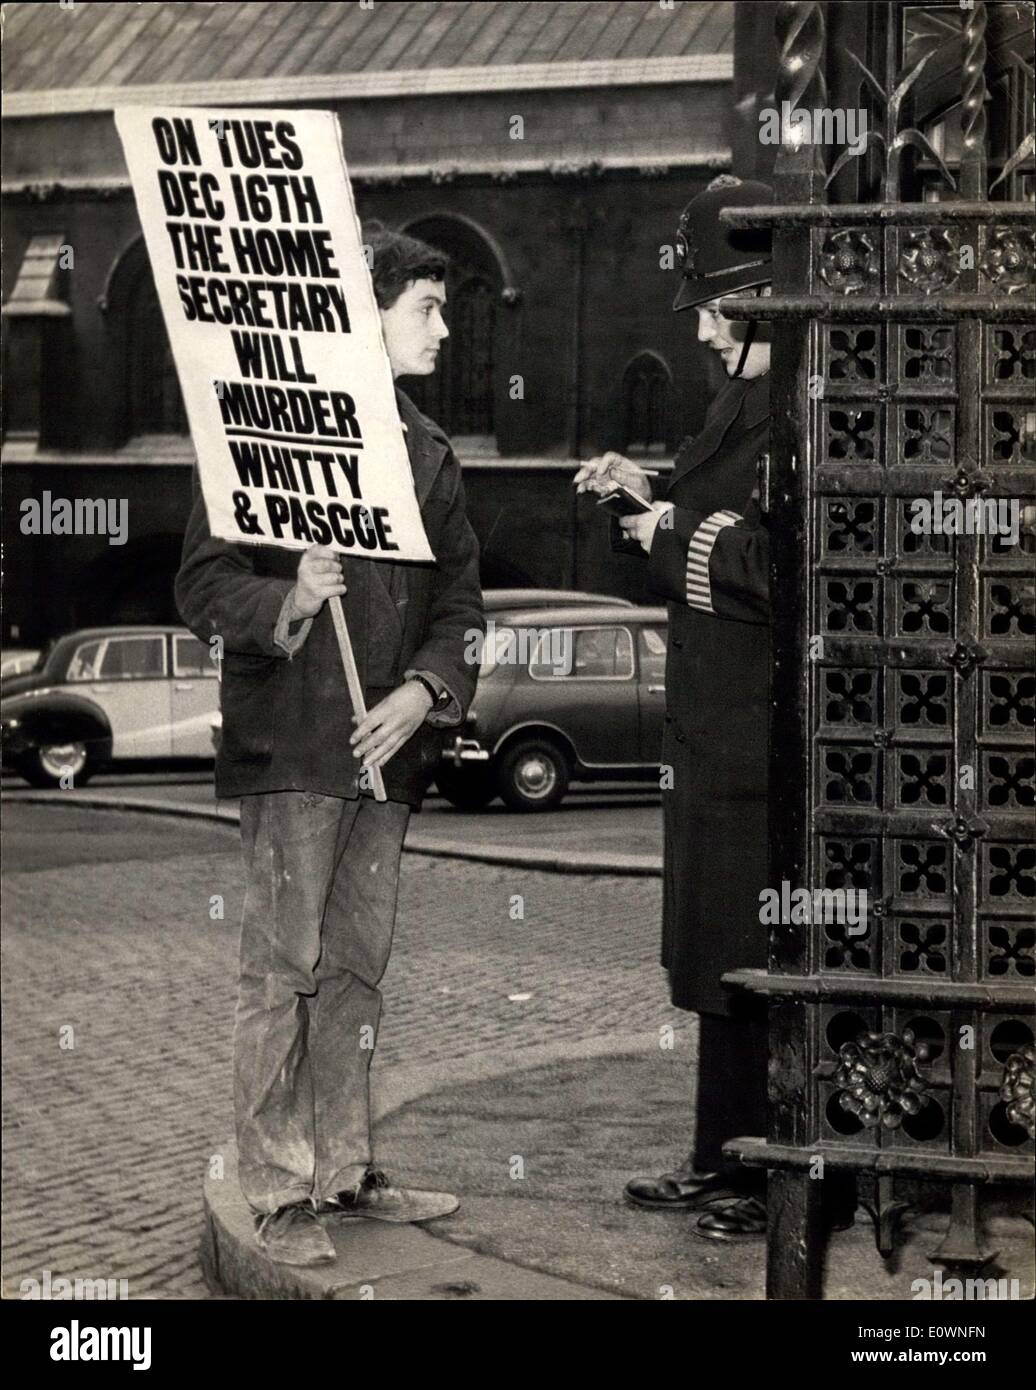 Dec. 16, 1963 - Demonstrator has his name taken - outside house of Commons....Protesting Against Tomorrow's Executions: Police took the name this afternoon of Timothy Fox - who was to be seen parading outside the House of Commons - protesting against the hanging tomorrow morning of murders - Dennis John Whitty (22) and Russell Pascoe (23). They killed 64 year old farmer William Rowe at his lonely farmhouse on the Lizard Peninsula - and ransacked his home. Photo Shows Police talk with Timothy Fox - at the gates of the house of Commons this afternoon. Stock Photo